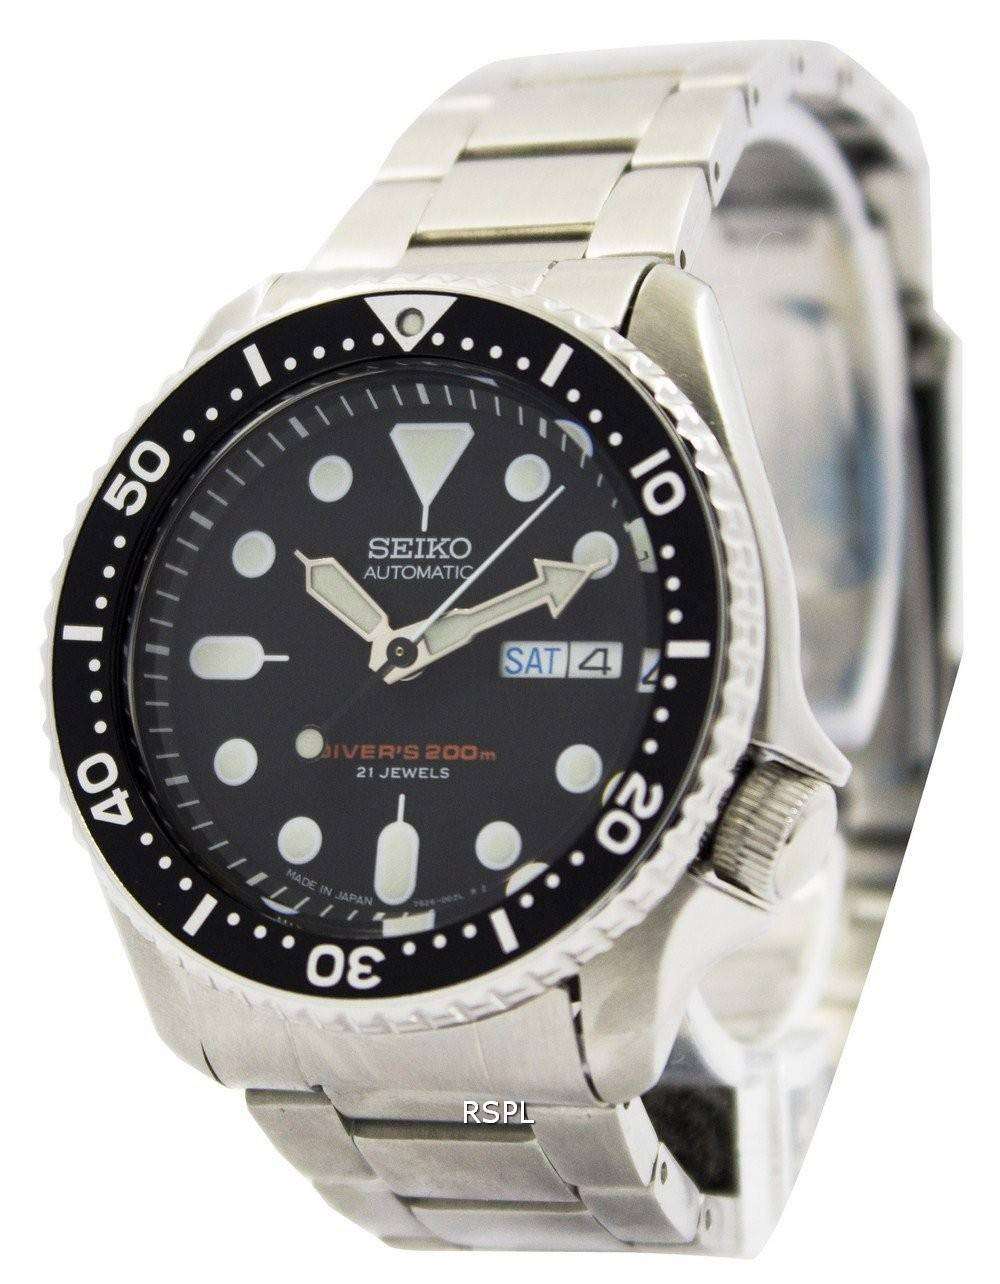 Seiko Automatic Diver's 200M Oyster Strap SKX007J3-Oys Men's Watch ...